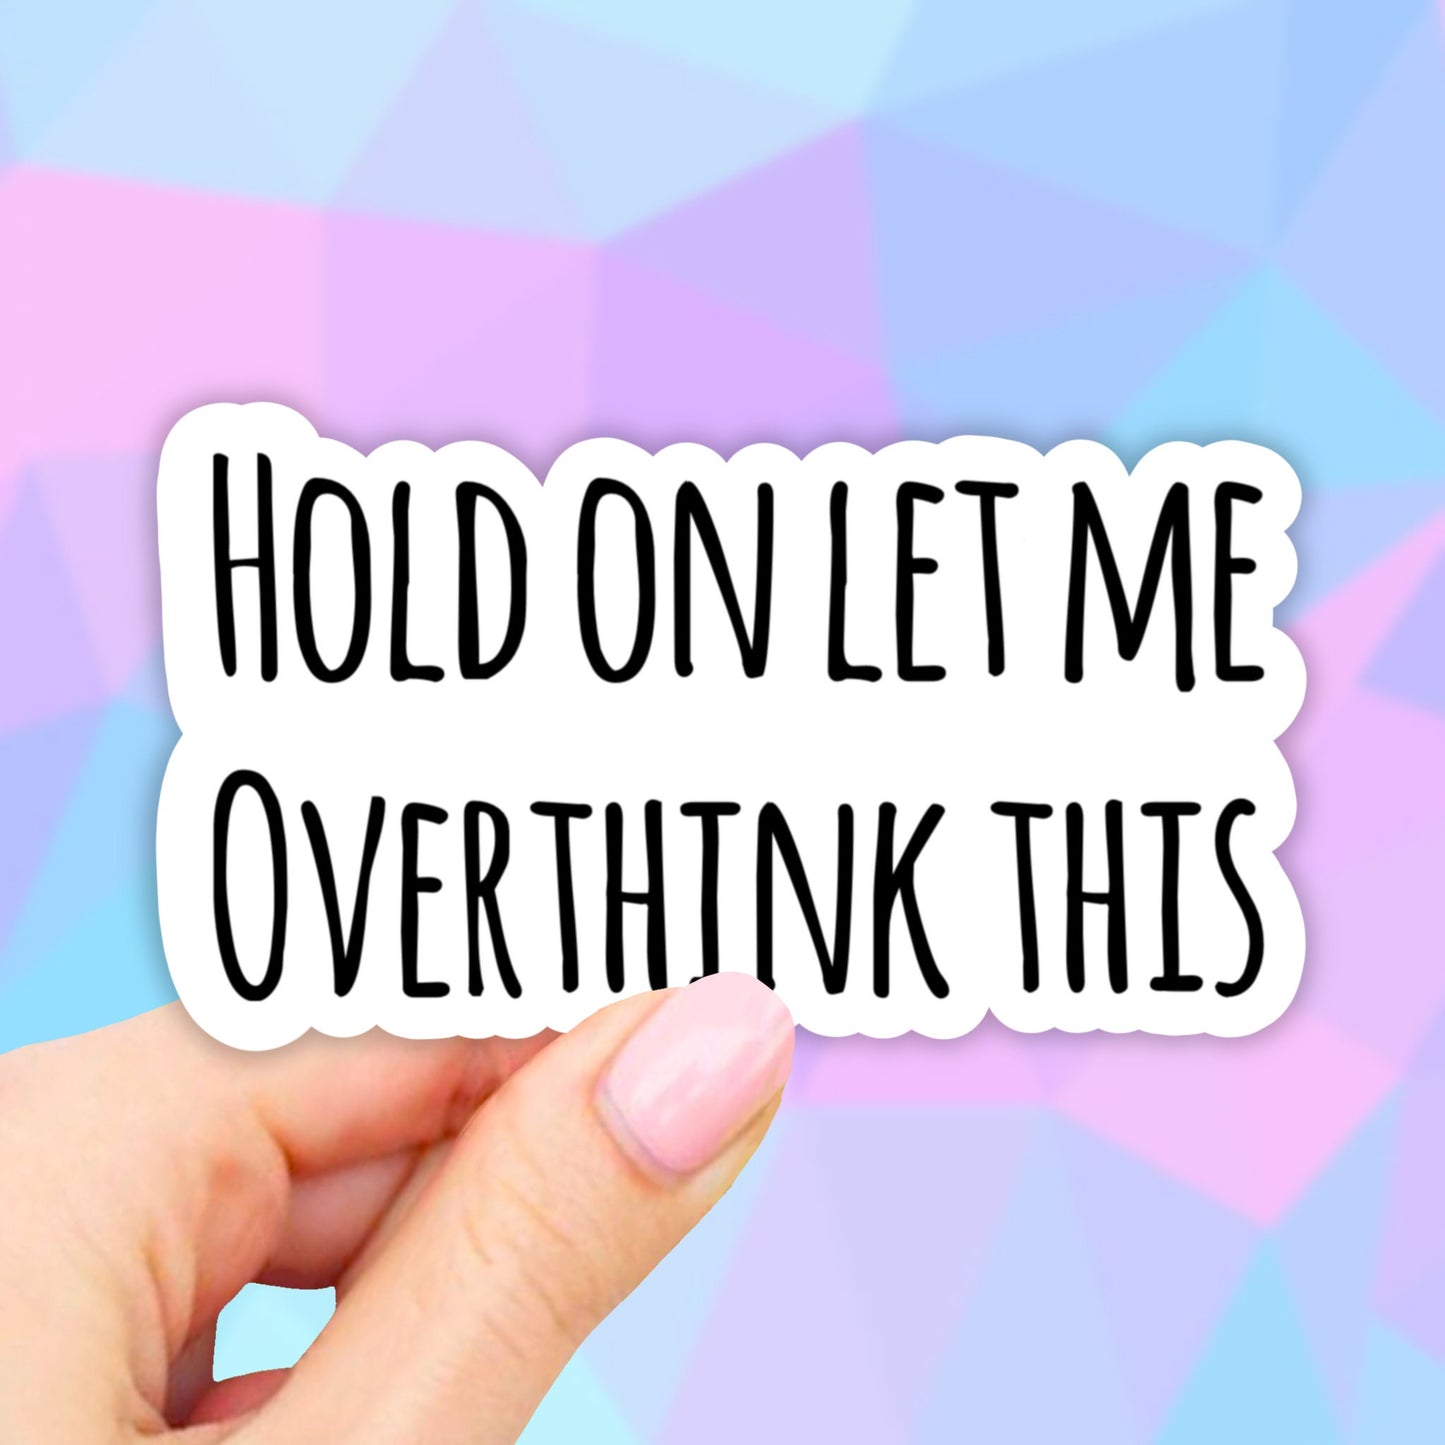 Hold on Let me over think this Sticker, Laptop stickers, Aesthetic Stickers, Water bottle Stickers, overthink Stickers, Vinyl Stickers